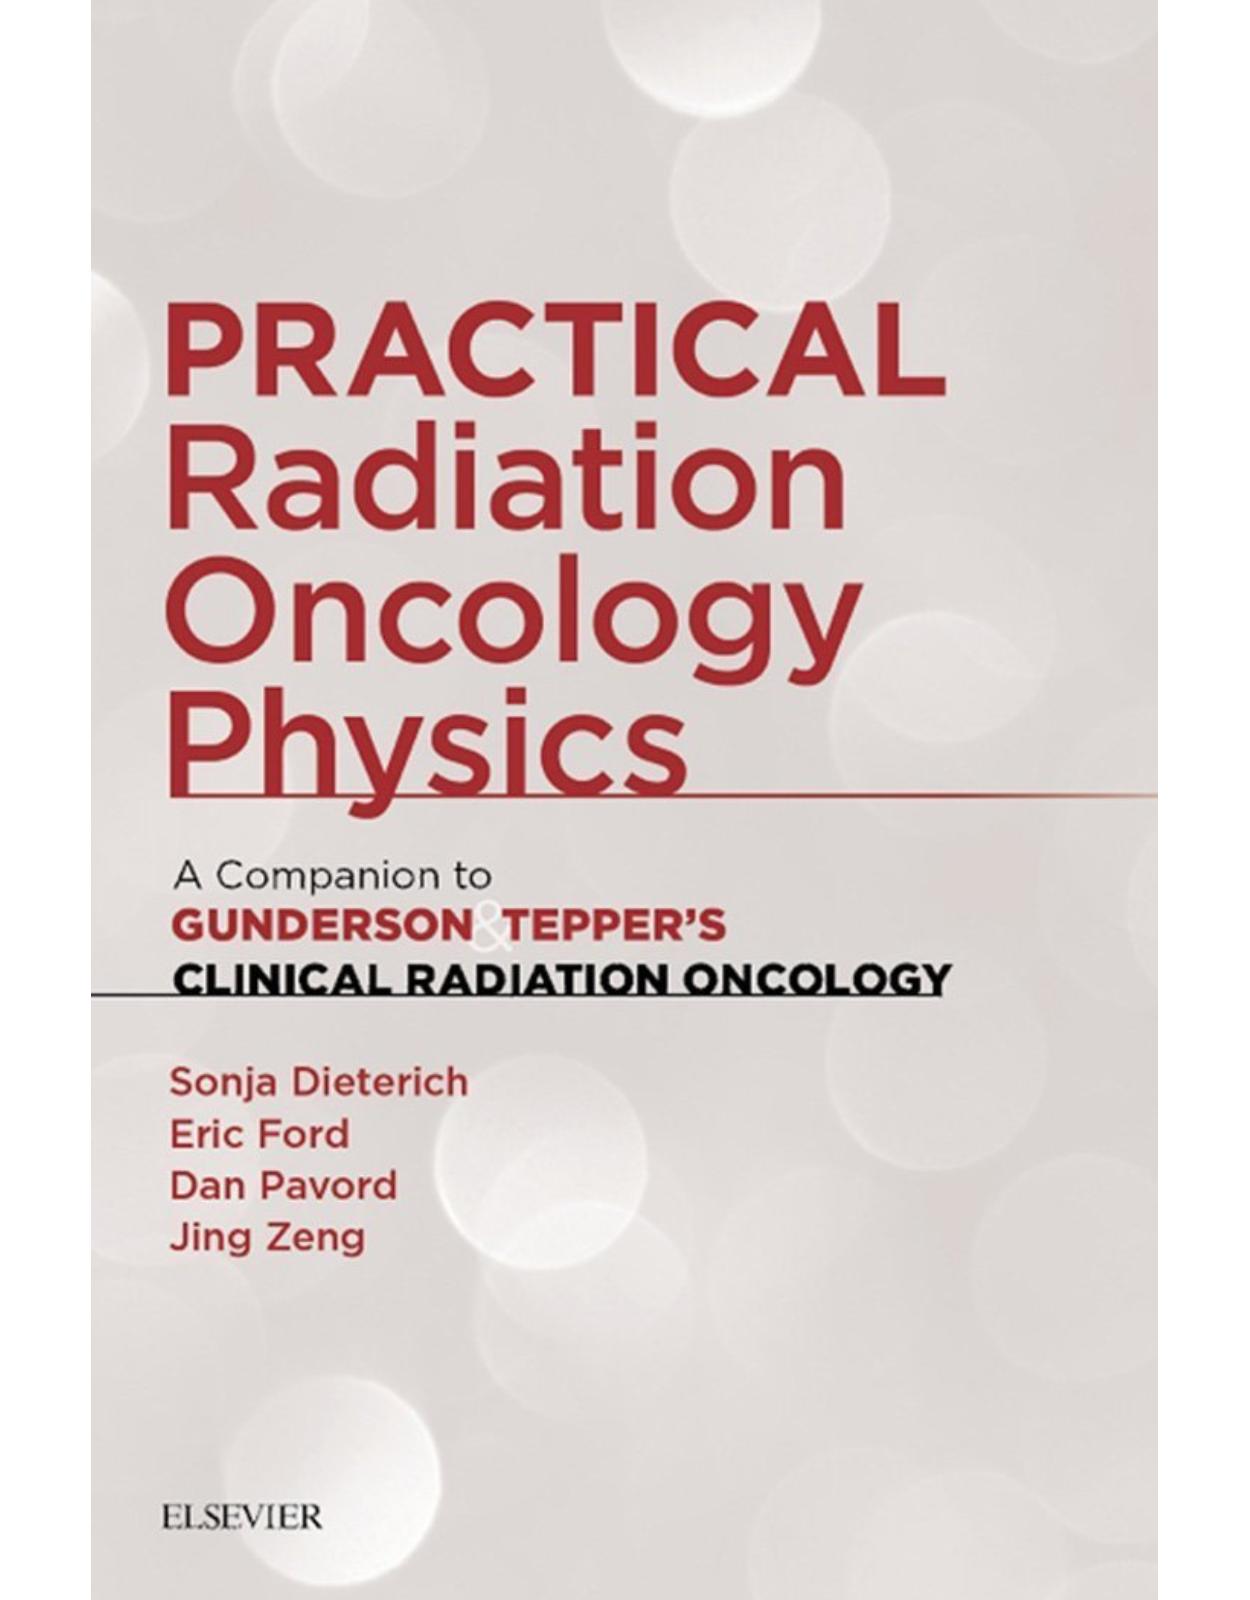 Practical Radiation Oncology Physics, A Companion to Gunderson & Tepper's Clinical Radiation Oncology